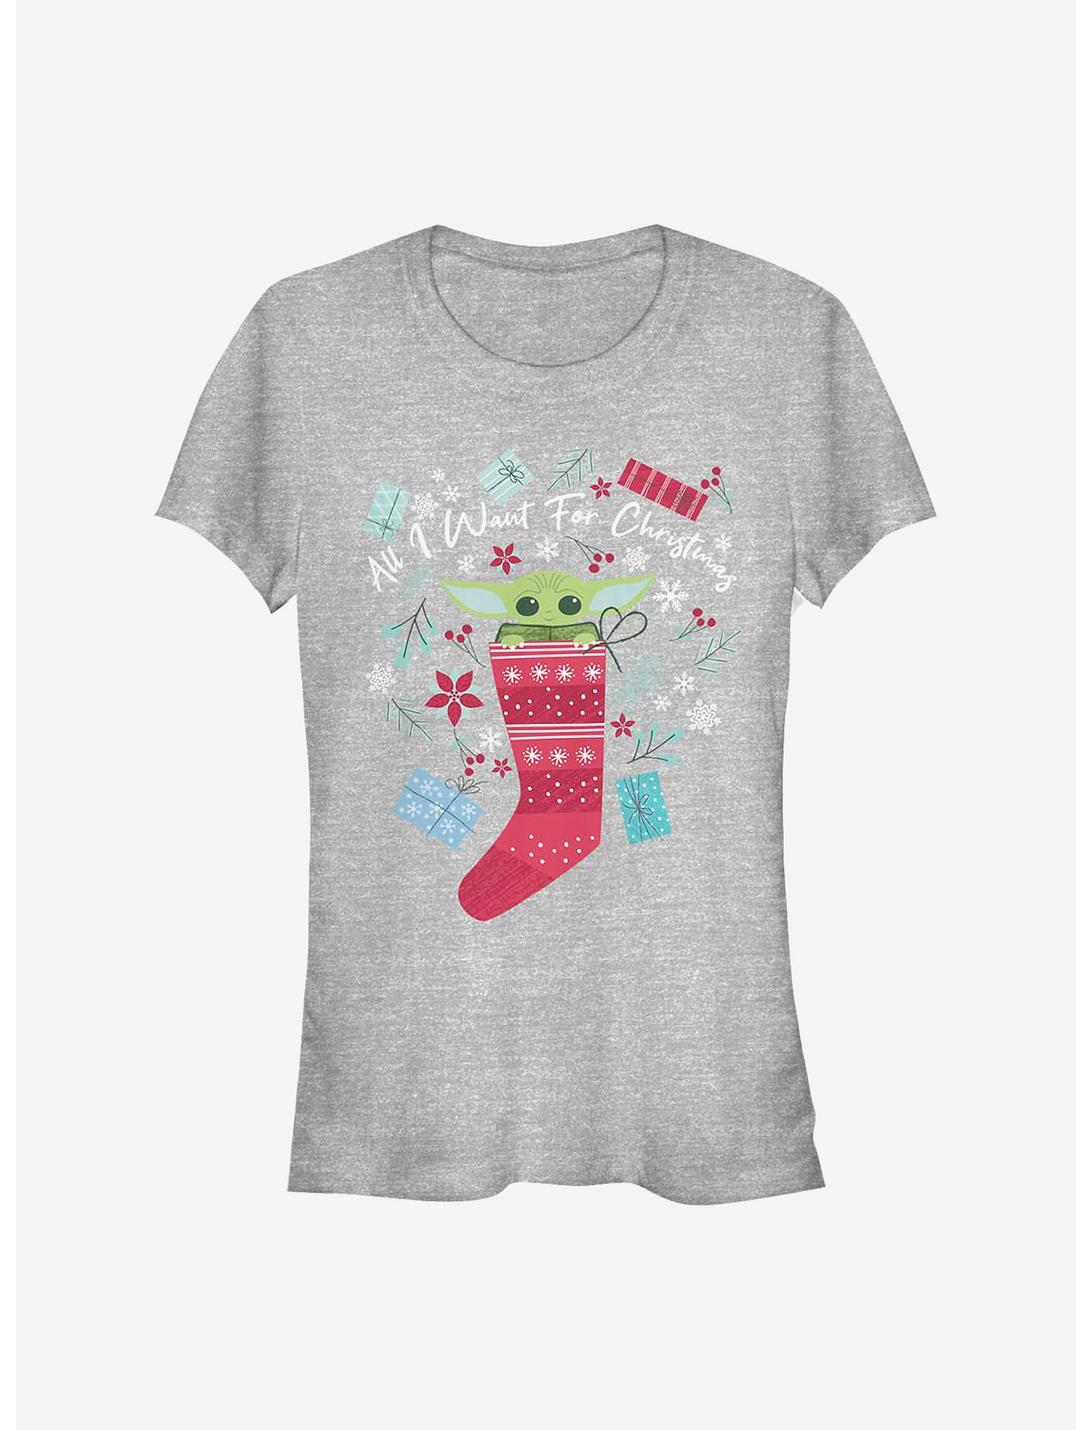 Star Wars The Mandalorian The Child All I Want For Christmas Girls T-Shirt, ATH HTR, hi-res